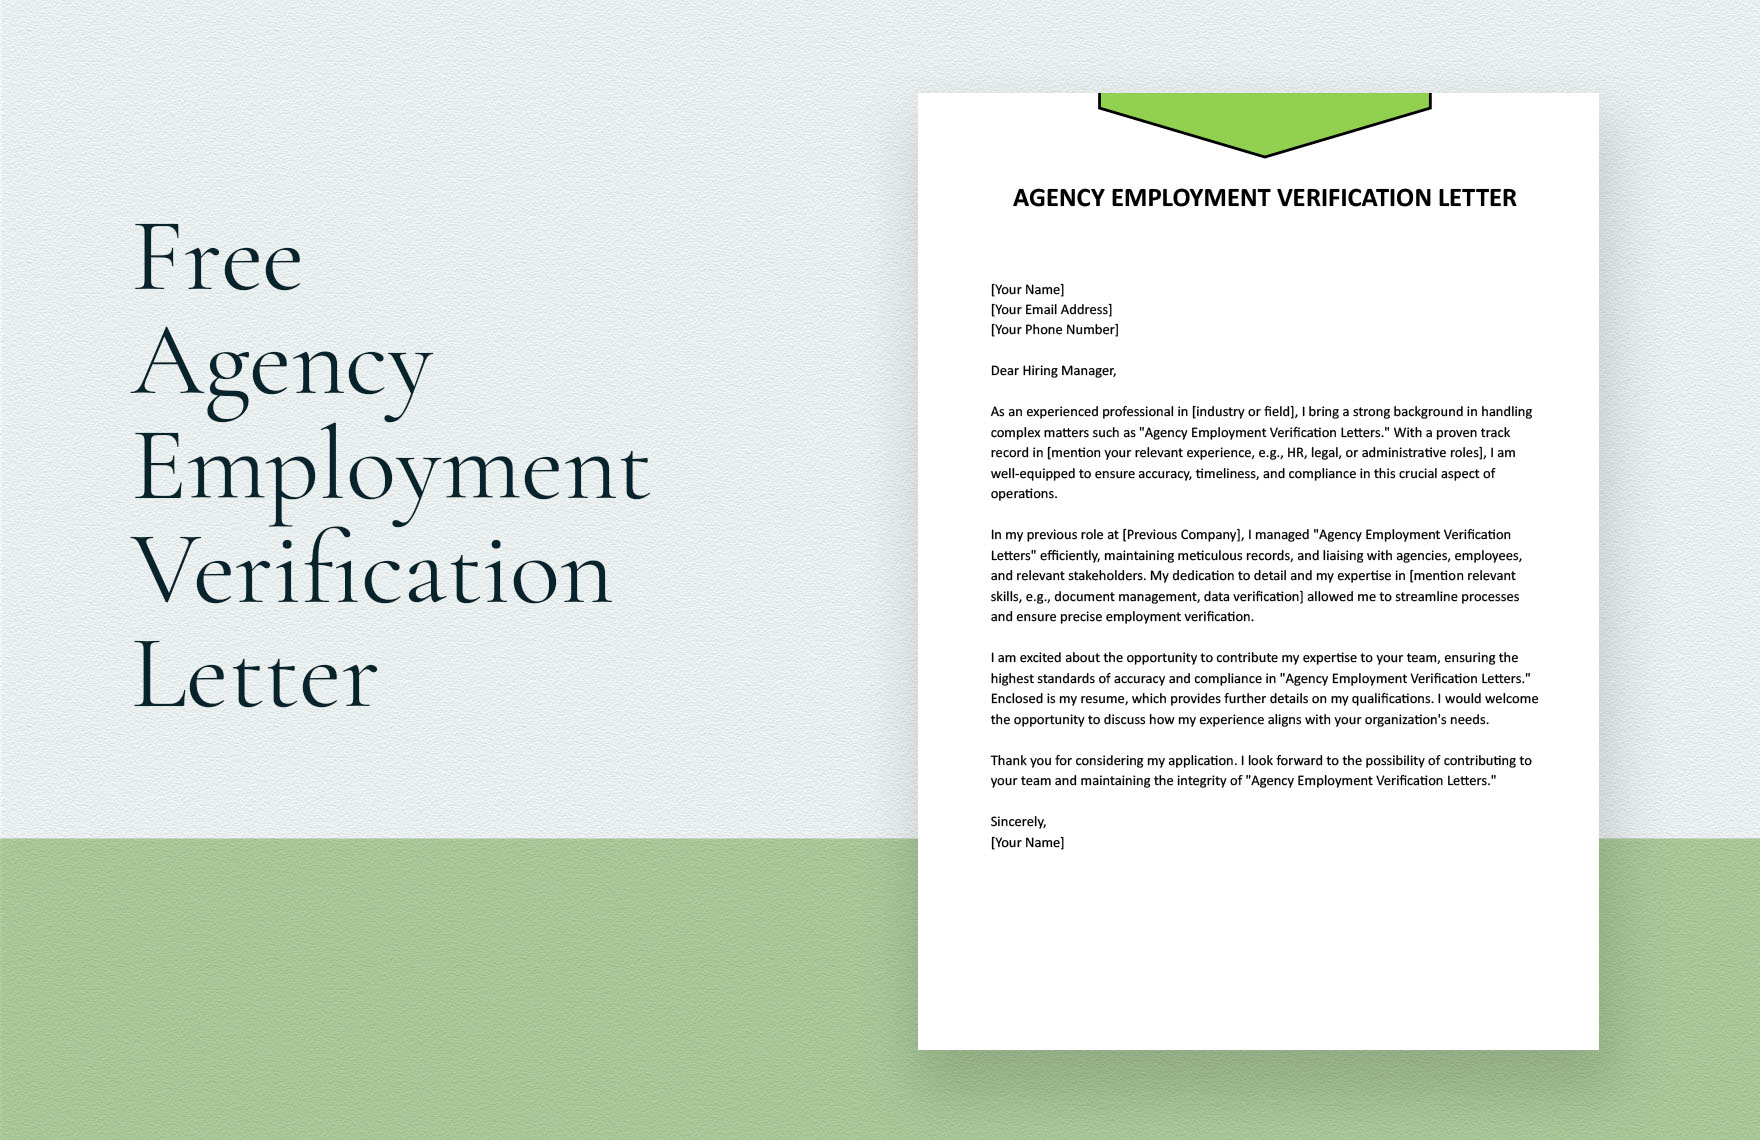 Free Agency Employment Verification Letter